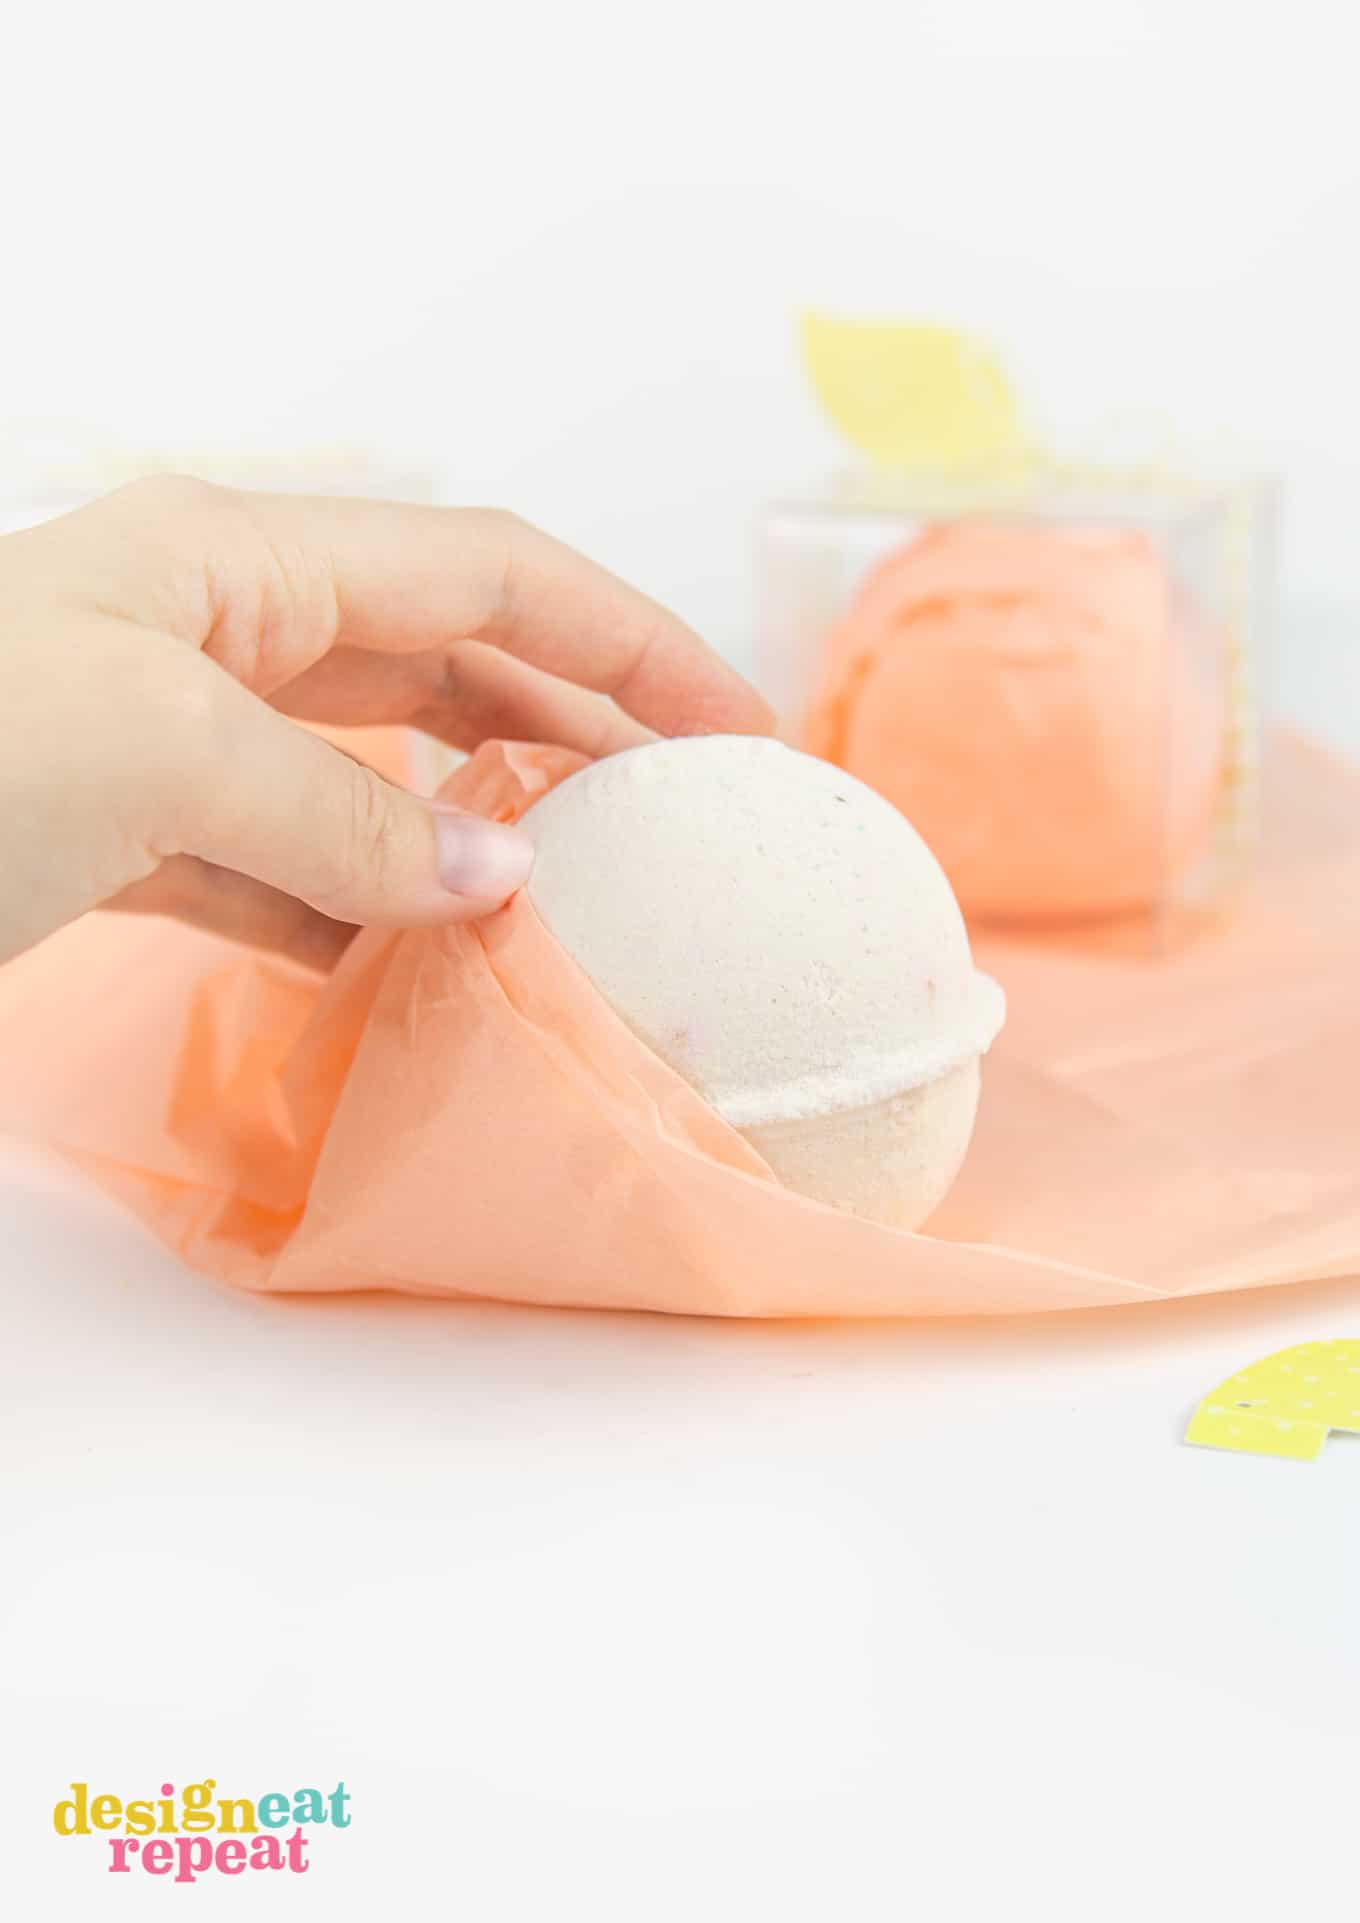 With back to school just around the corner, give the gift of relaxation with this peachy bath bomb teacher gift idea! Also great for thank you gifts, southern wedding party favors, or fruit party favors!